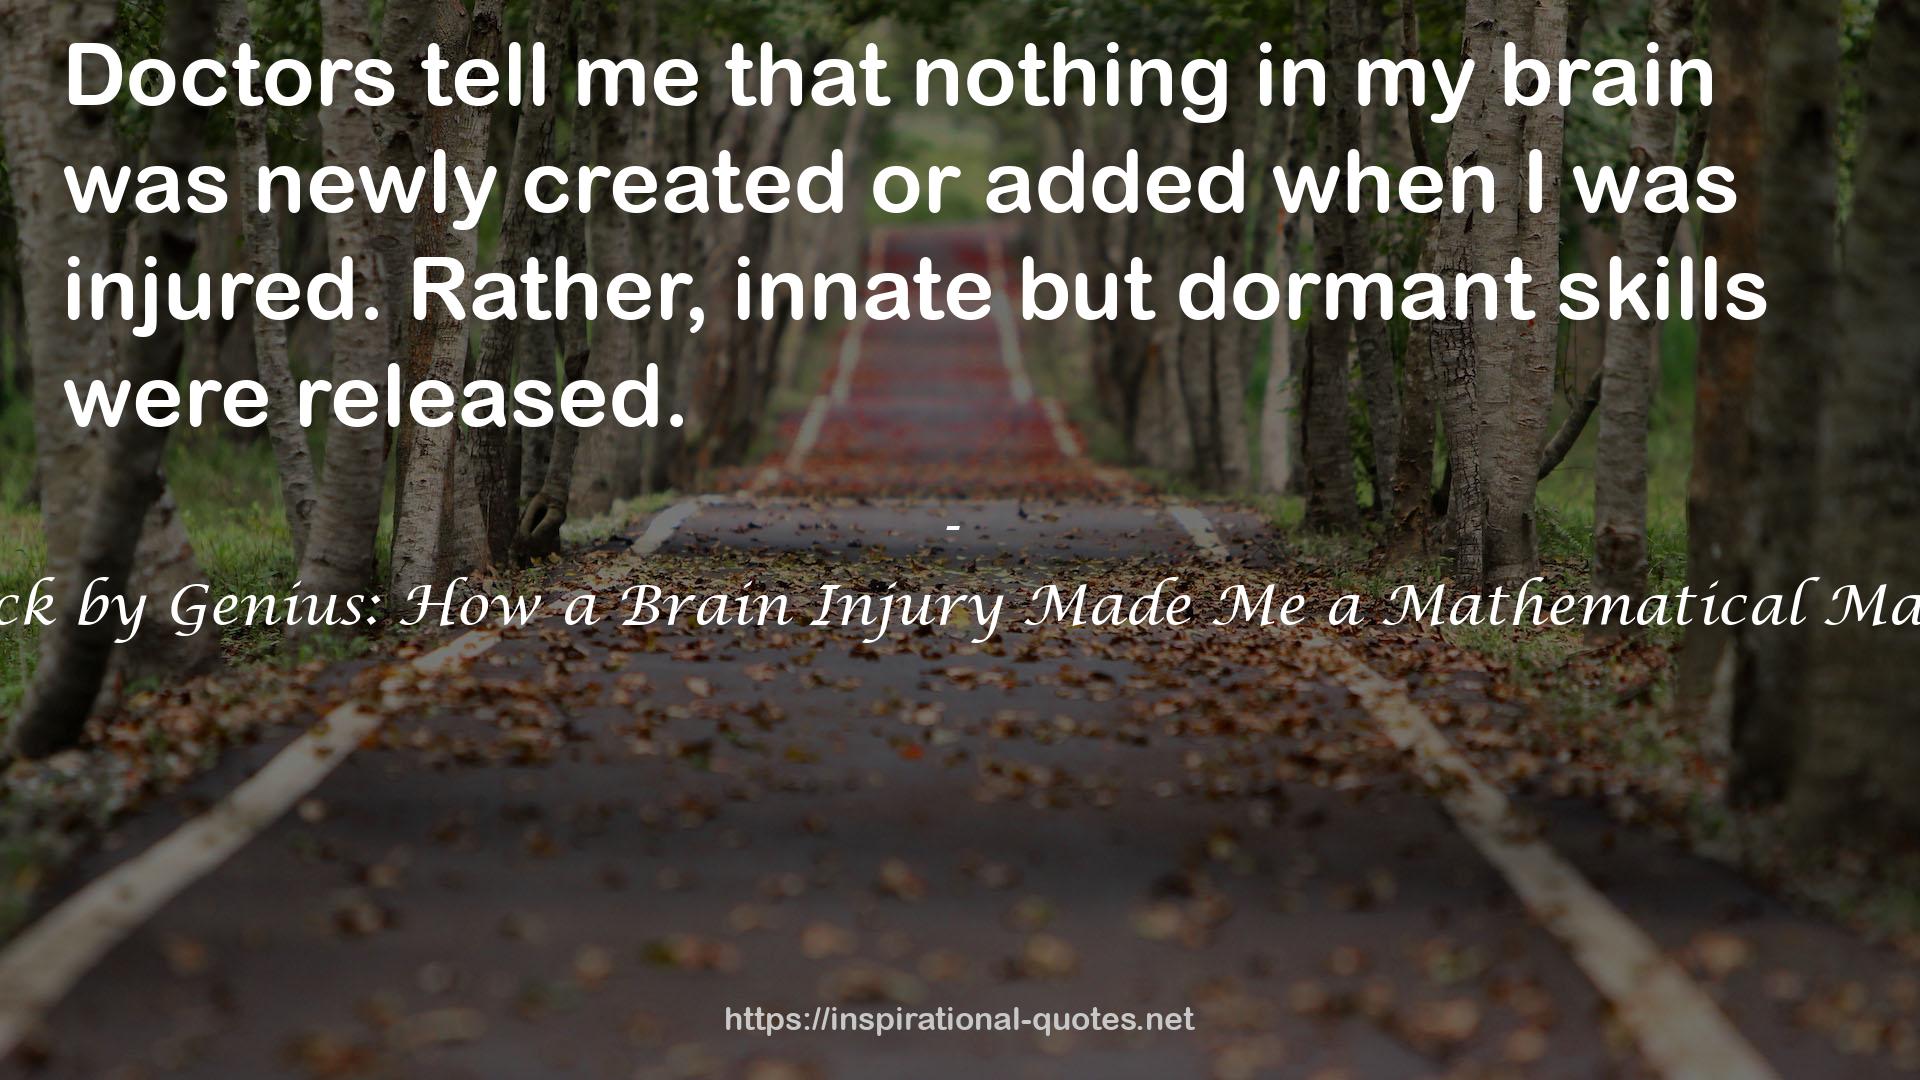 Struck by Genius: How a Brain Injury Made Me a Mathematical Marvel QUOTES